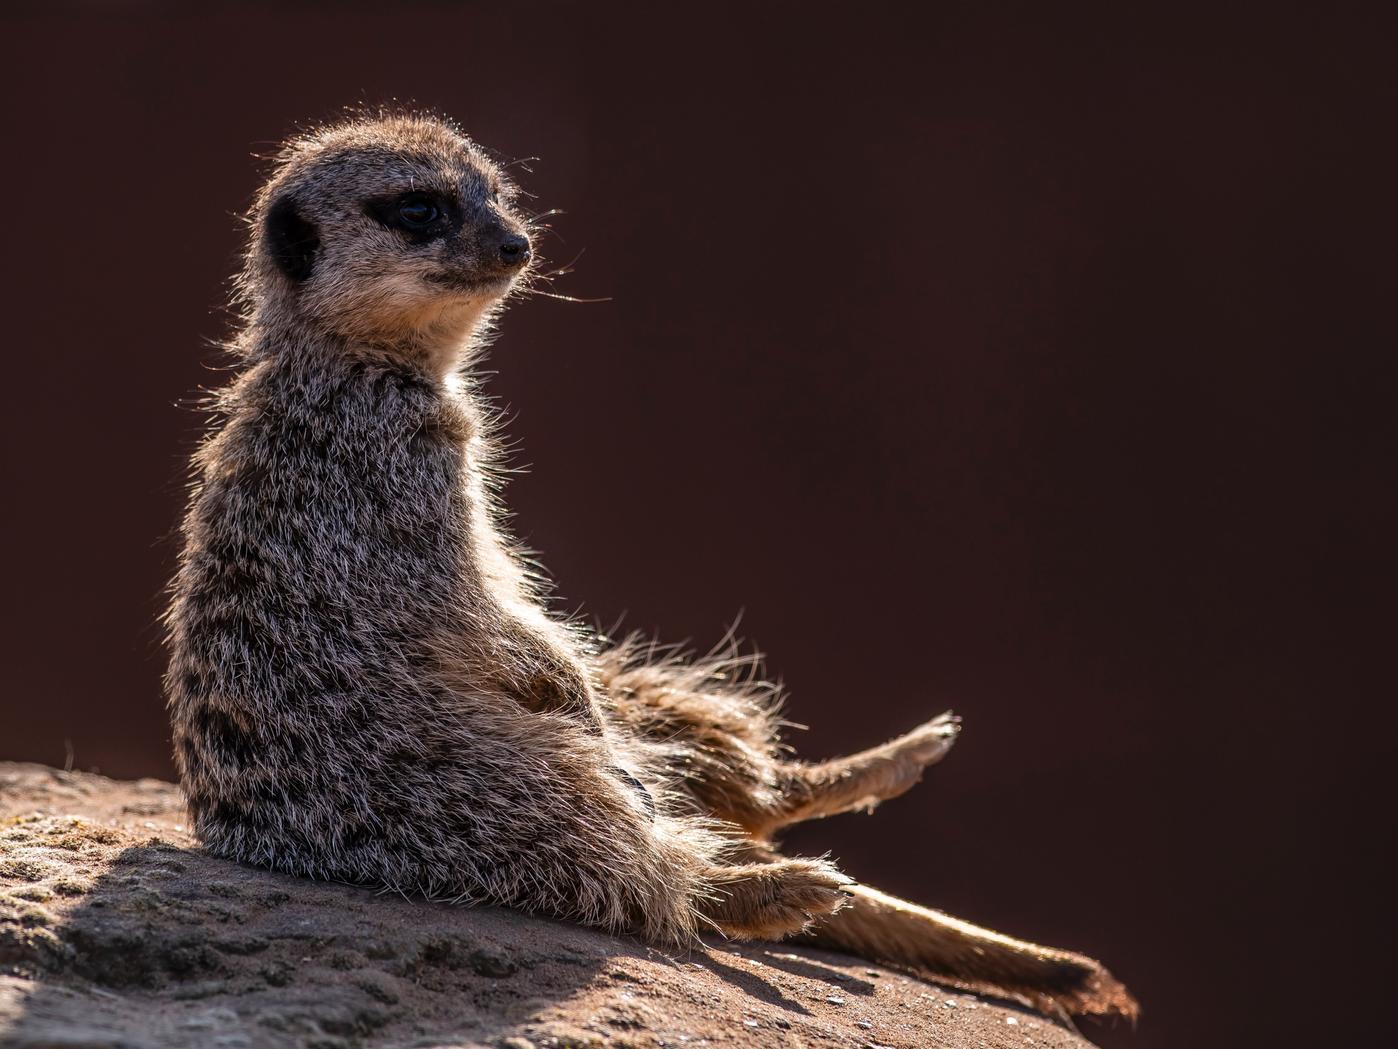 As temperatures soared in June the animals allenjoyed the sun. While the Polar Bears dived into their pool, and the Lemurs enjoyed ice fruit lollies, the heat loving Meerkats decided to bask in the sun.